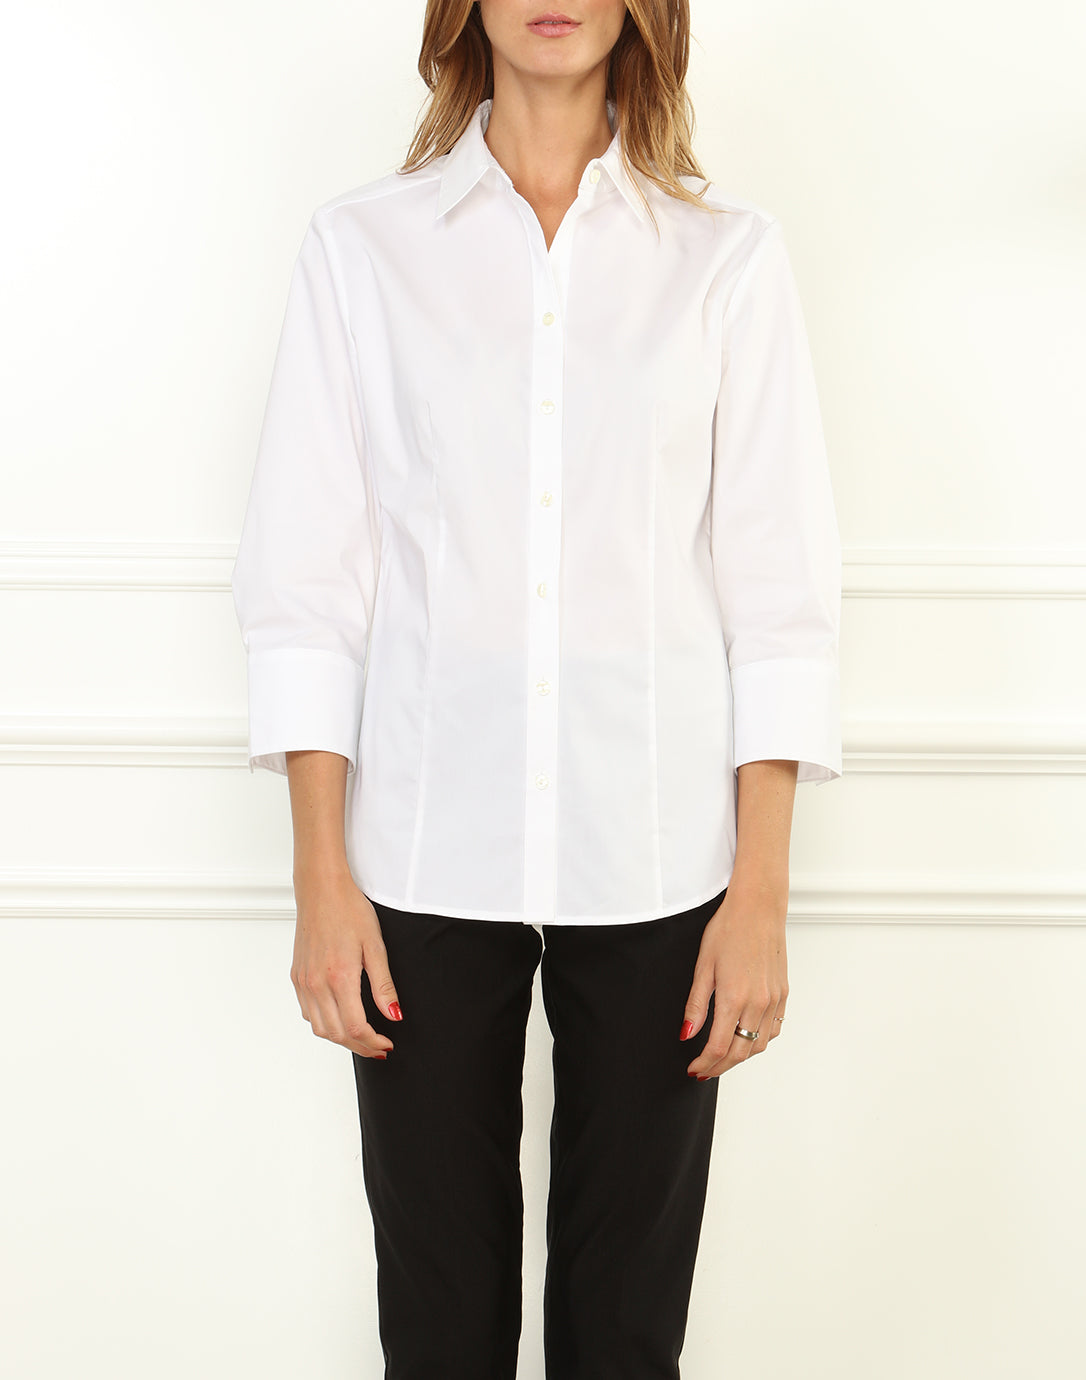 Diane Classic Fit 3/4 Sleeve Shirt in White